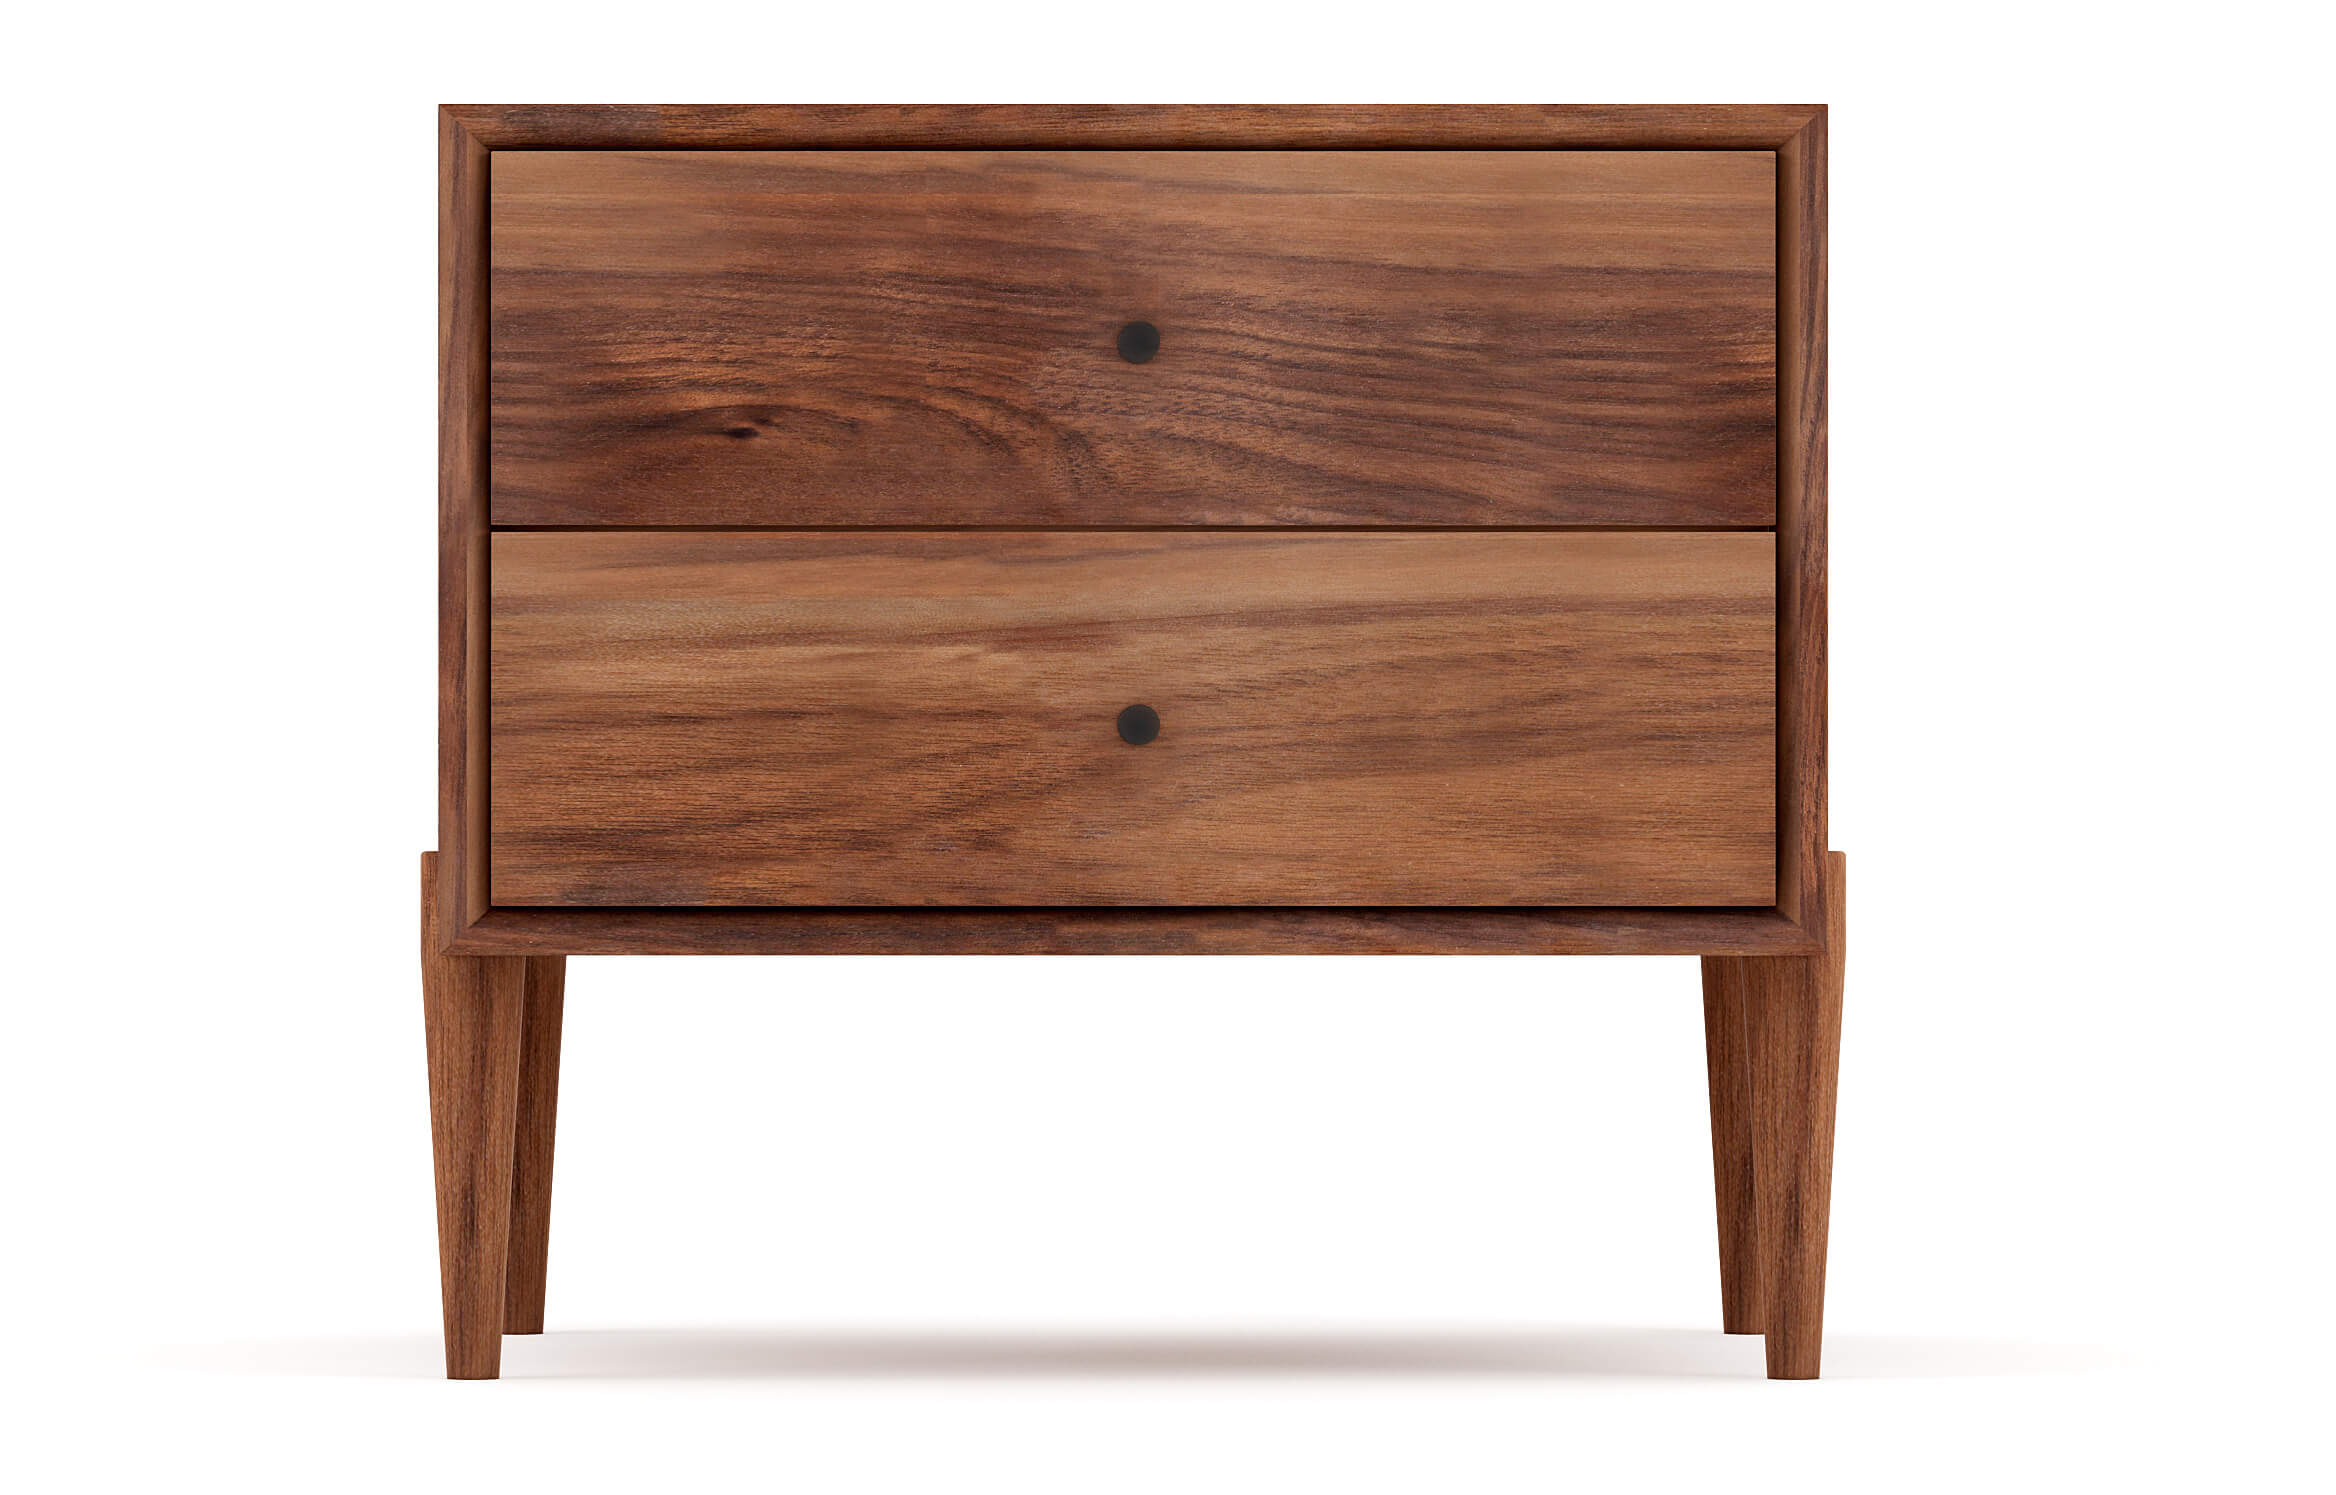 Shown in walnut with knobs